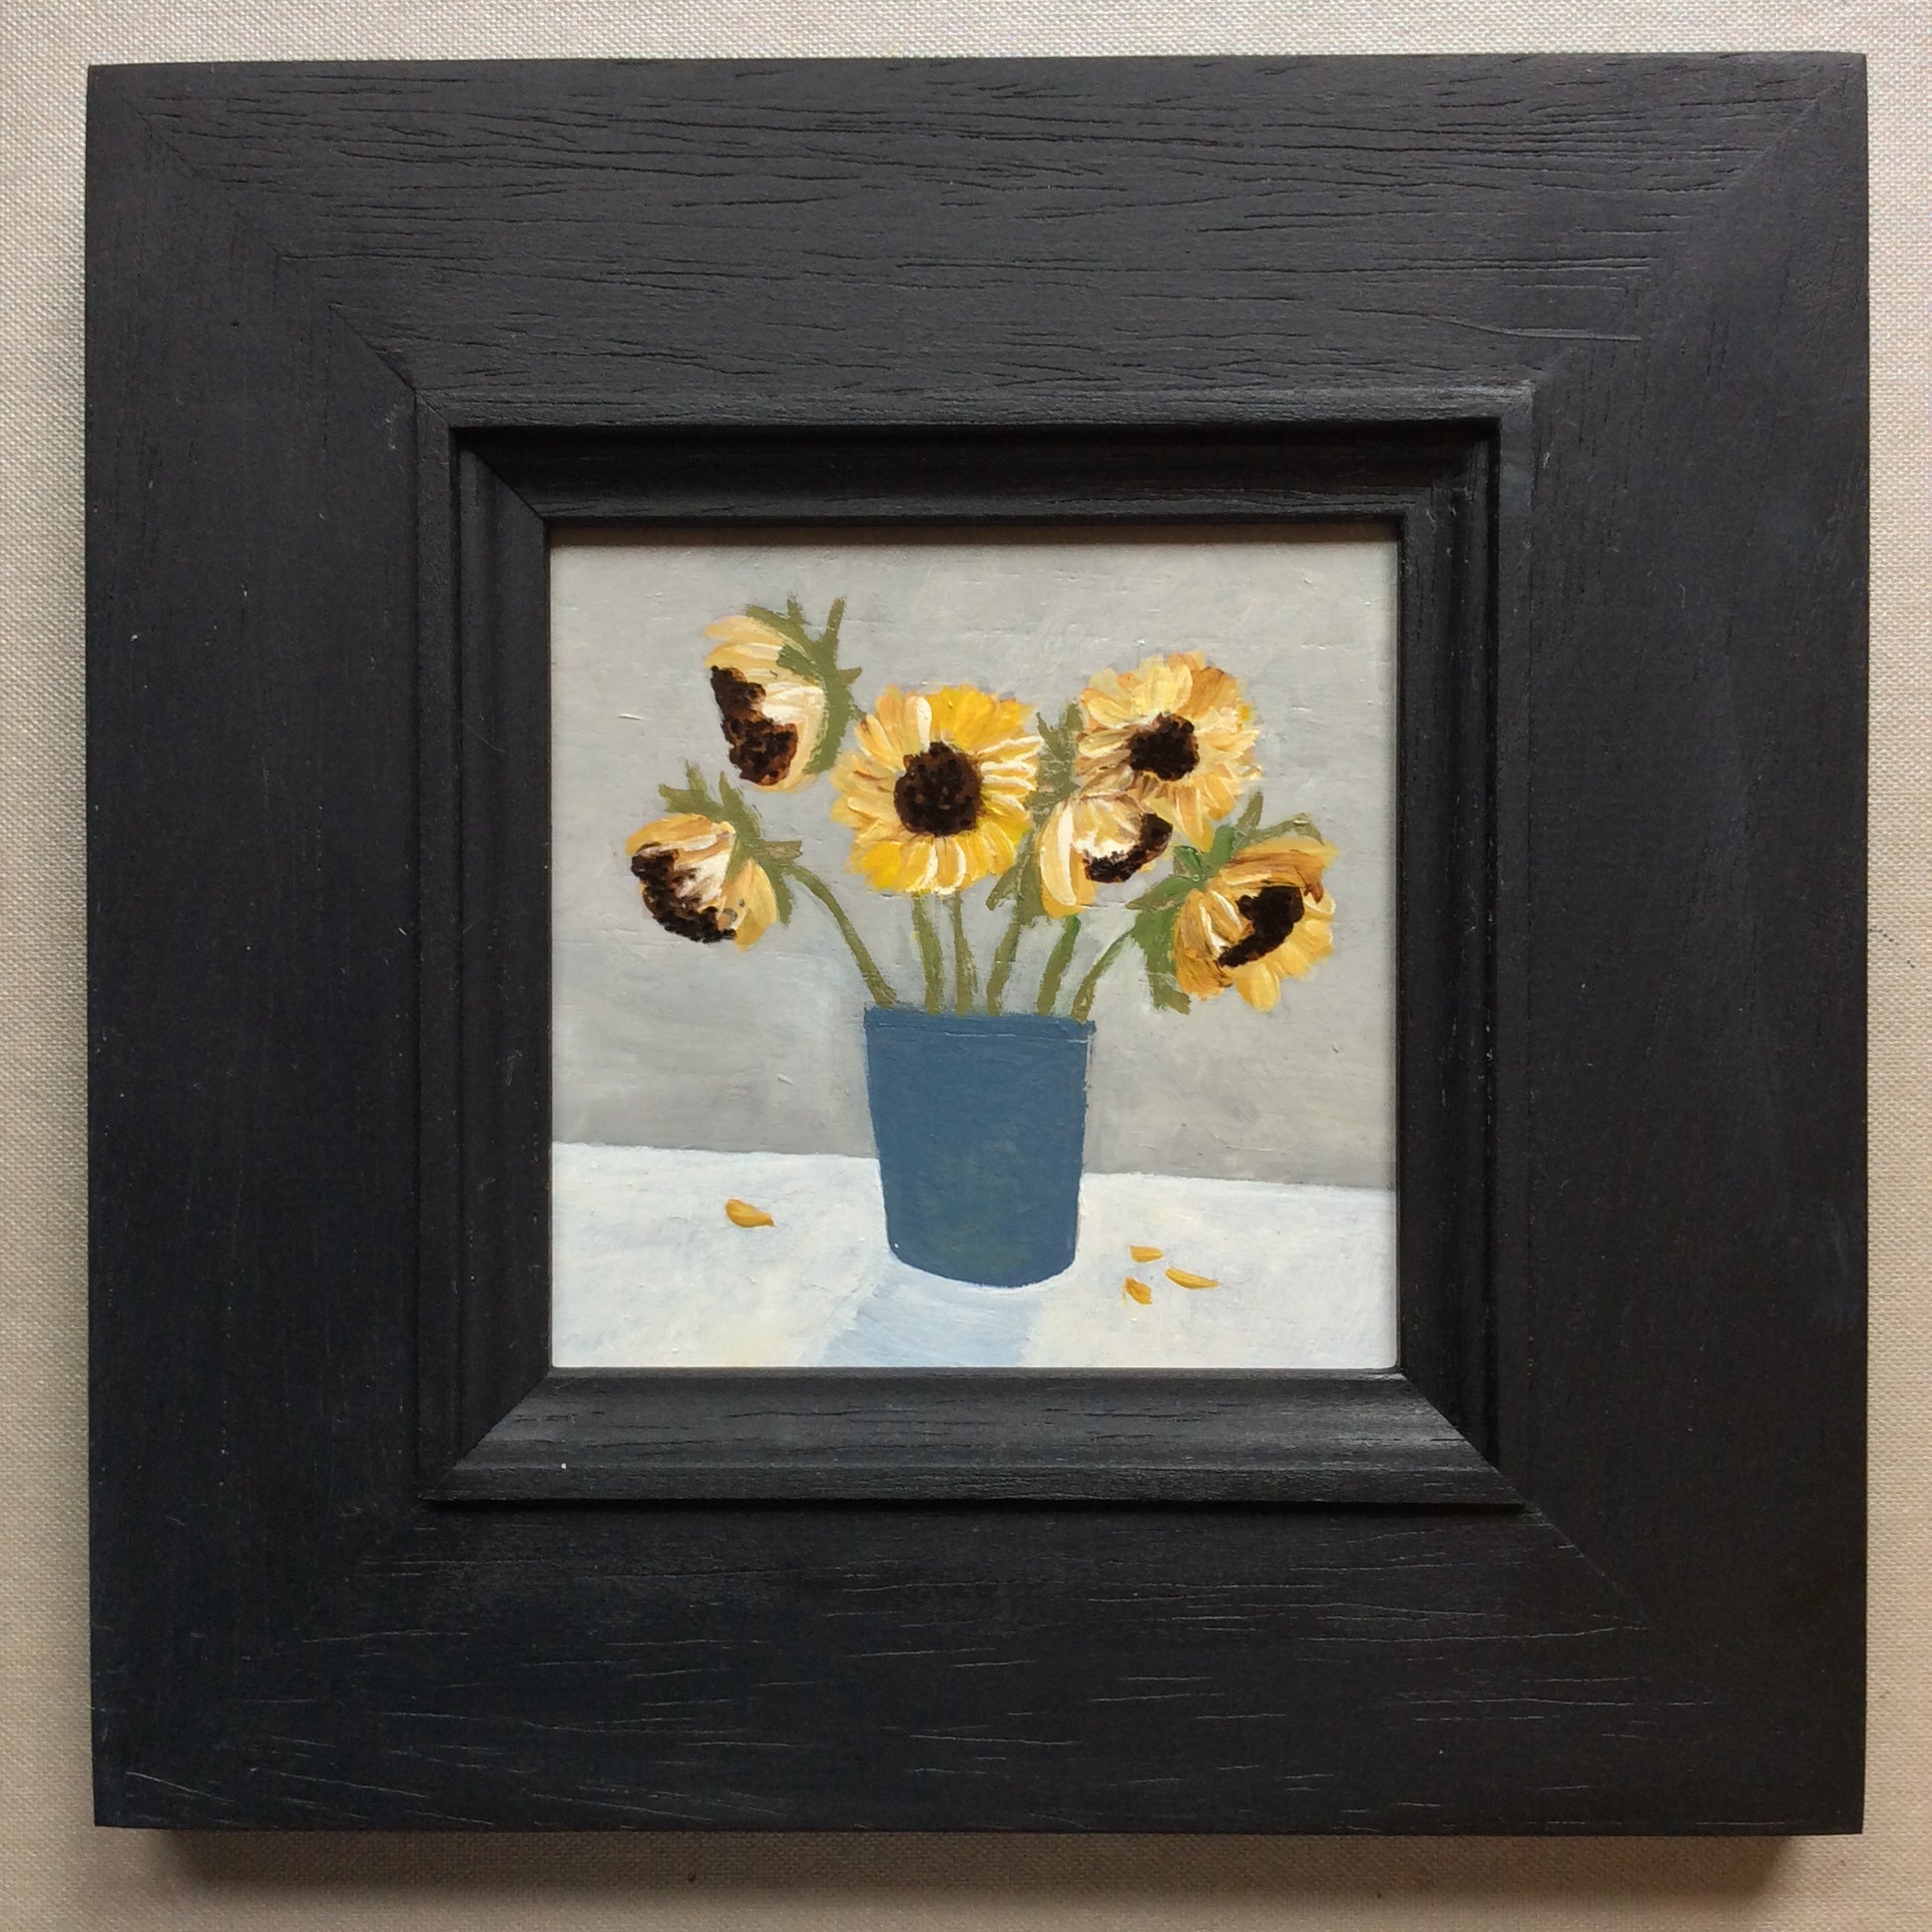 Mixed Media art on wood By Louise O’Hara  “Sunflowers”